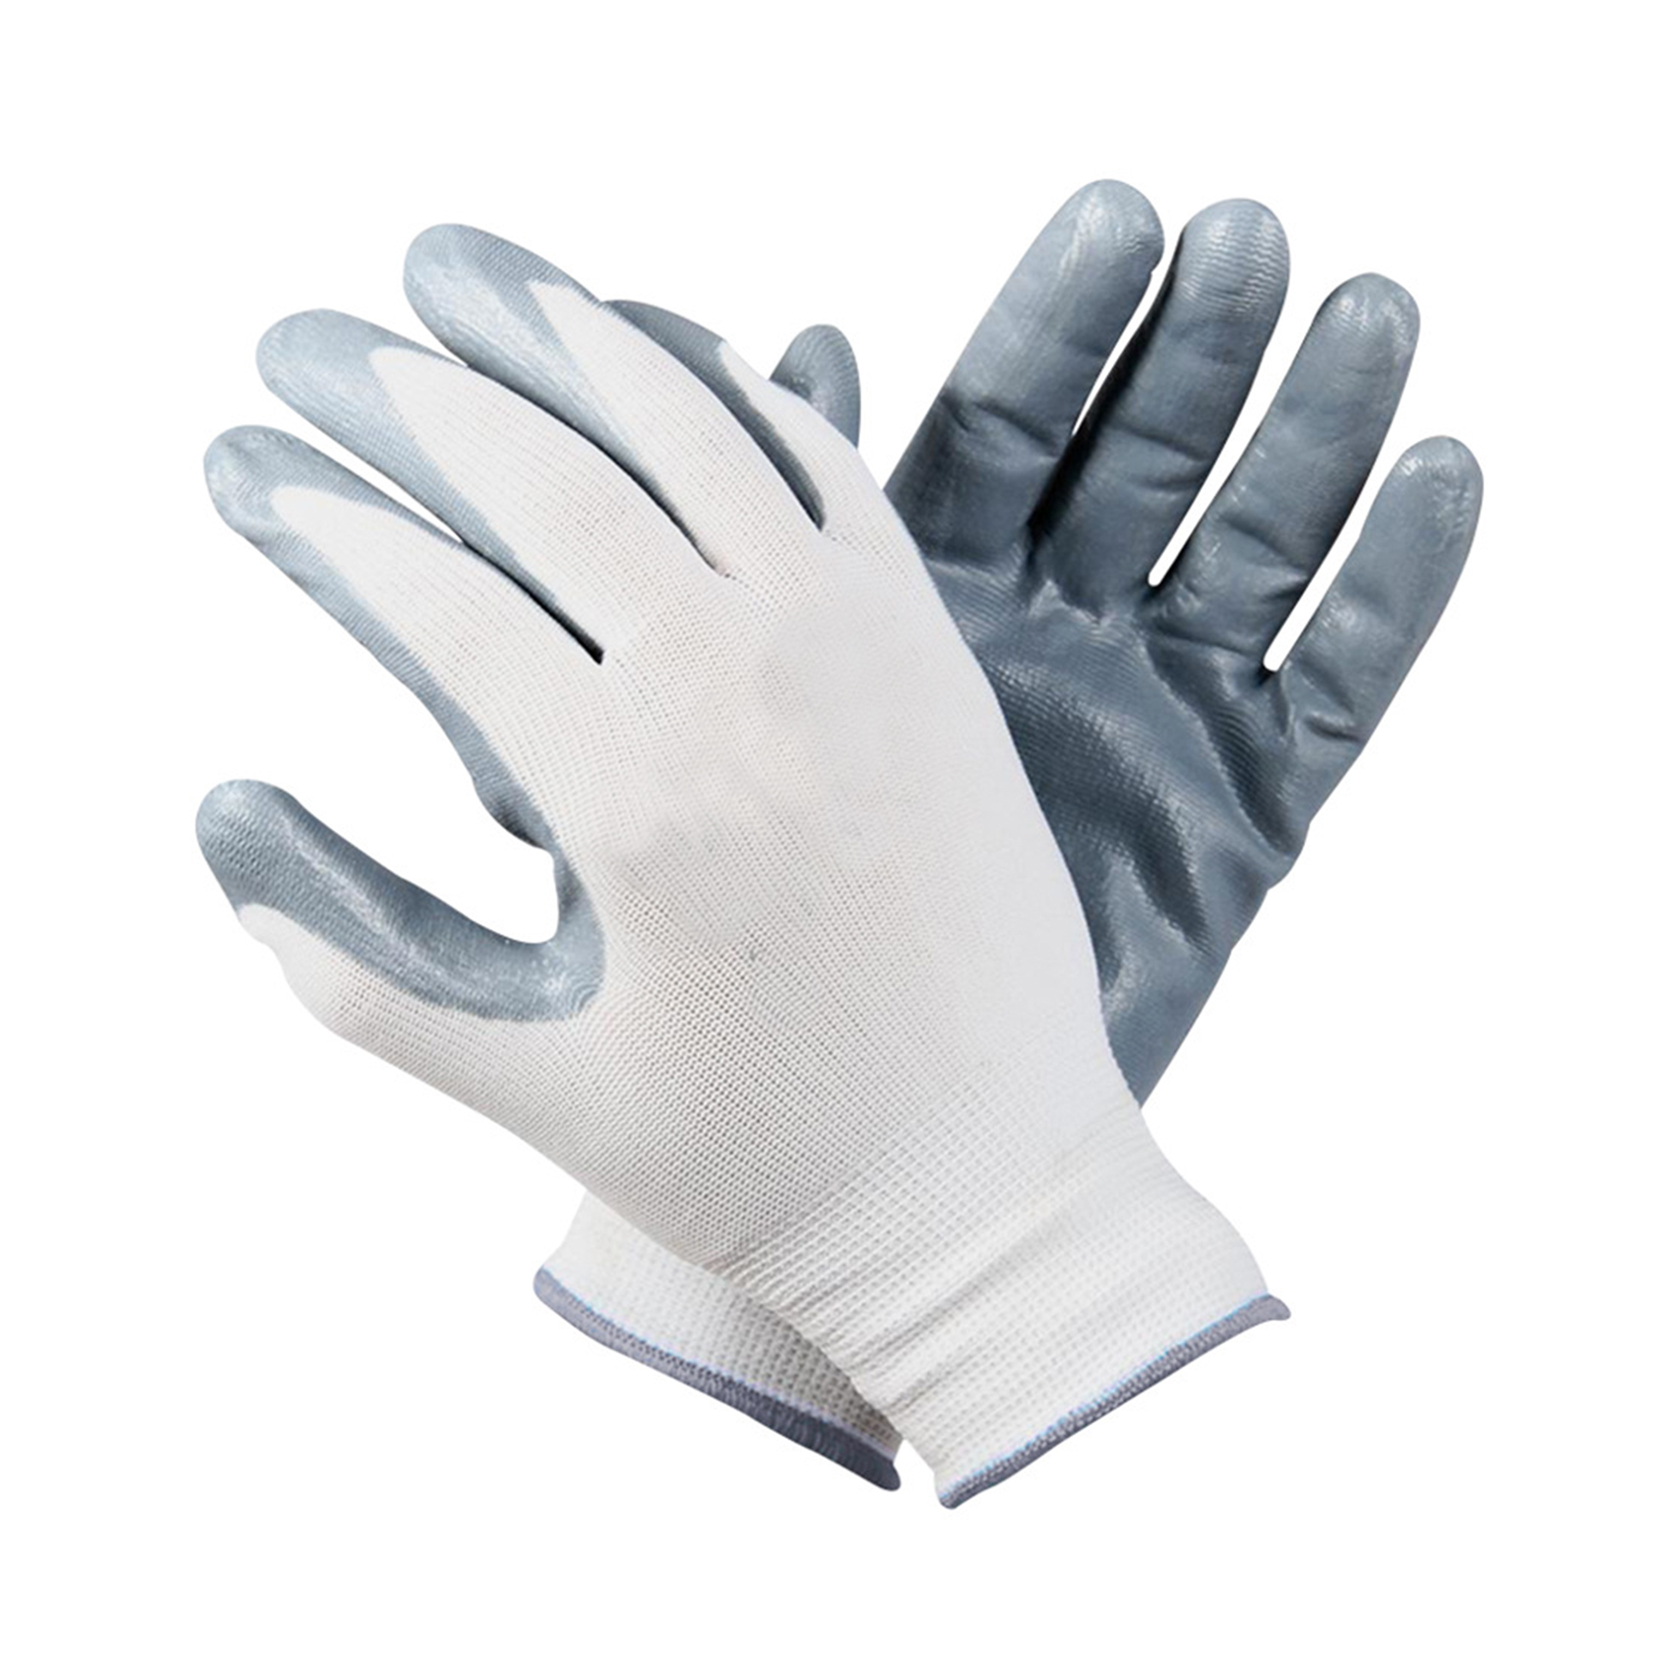 Factory Wholesale Industrial Protective Gloves Polyester Nitrile Coated Waterproof Oil Resistant Abrasion Resistant Dipped Palm Safety Work Glove